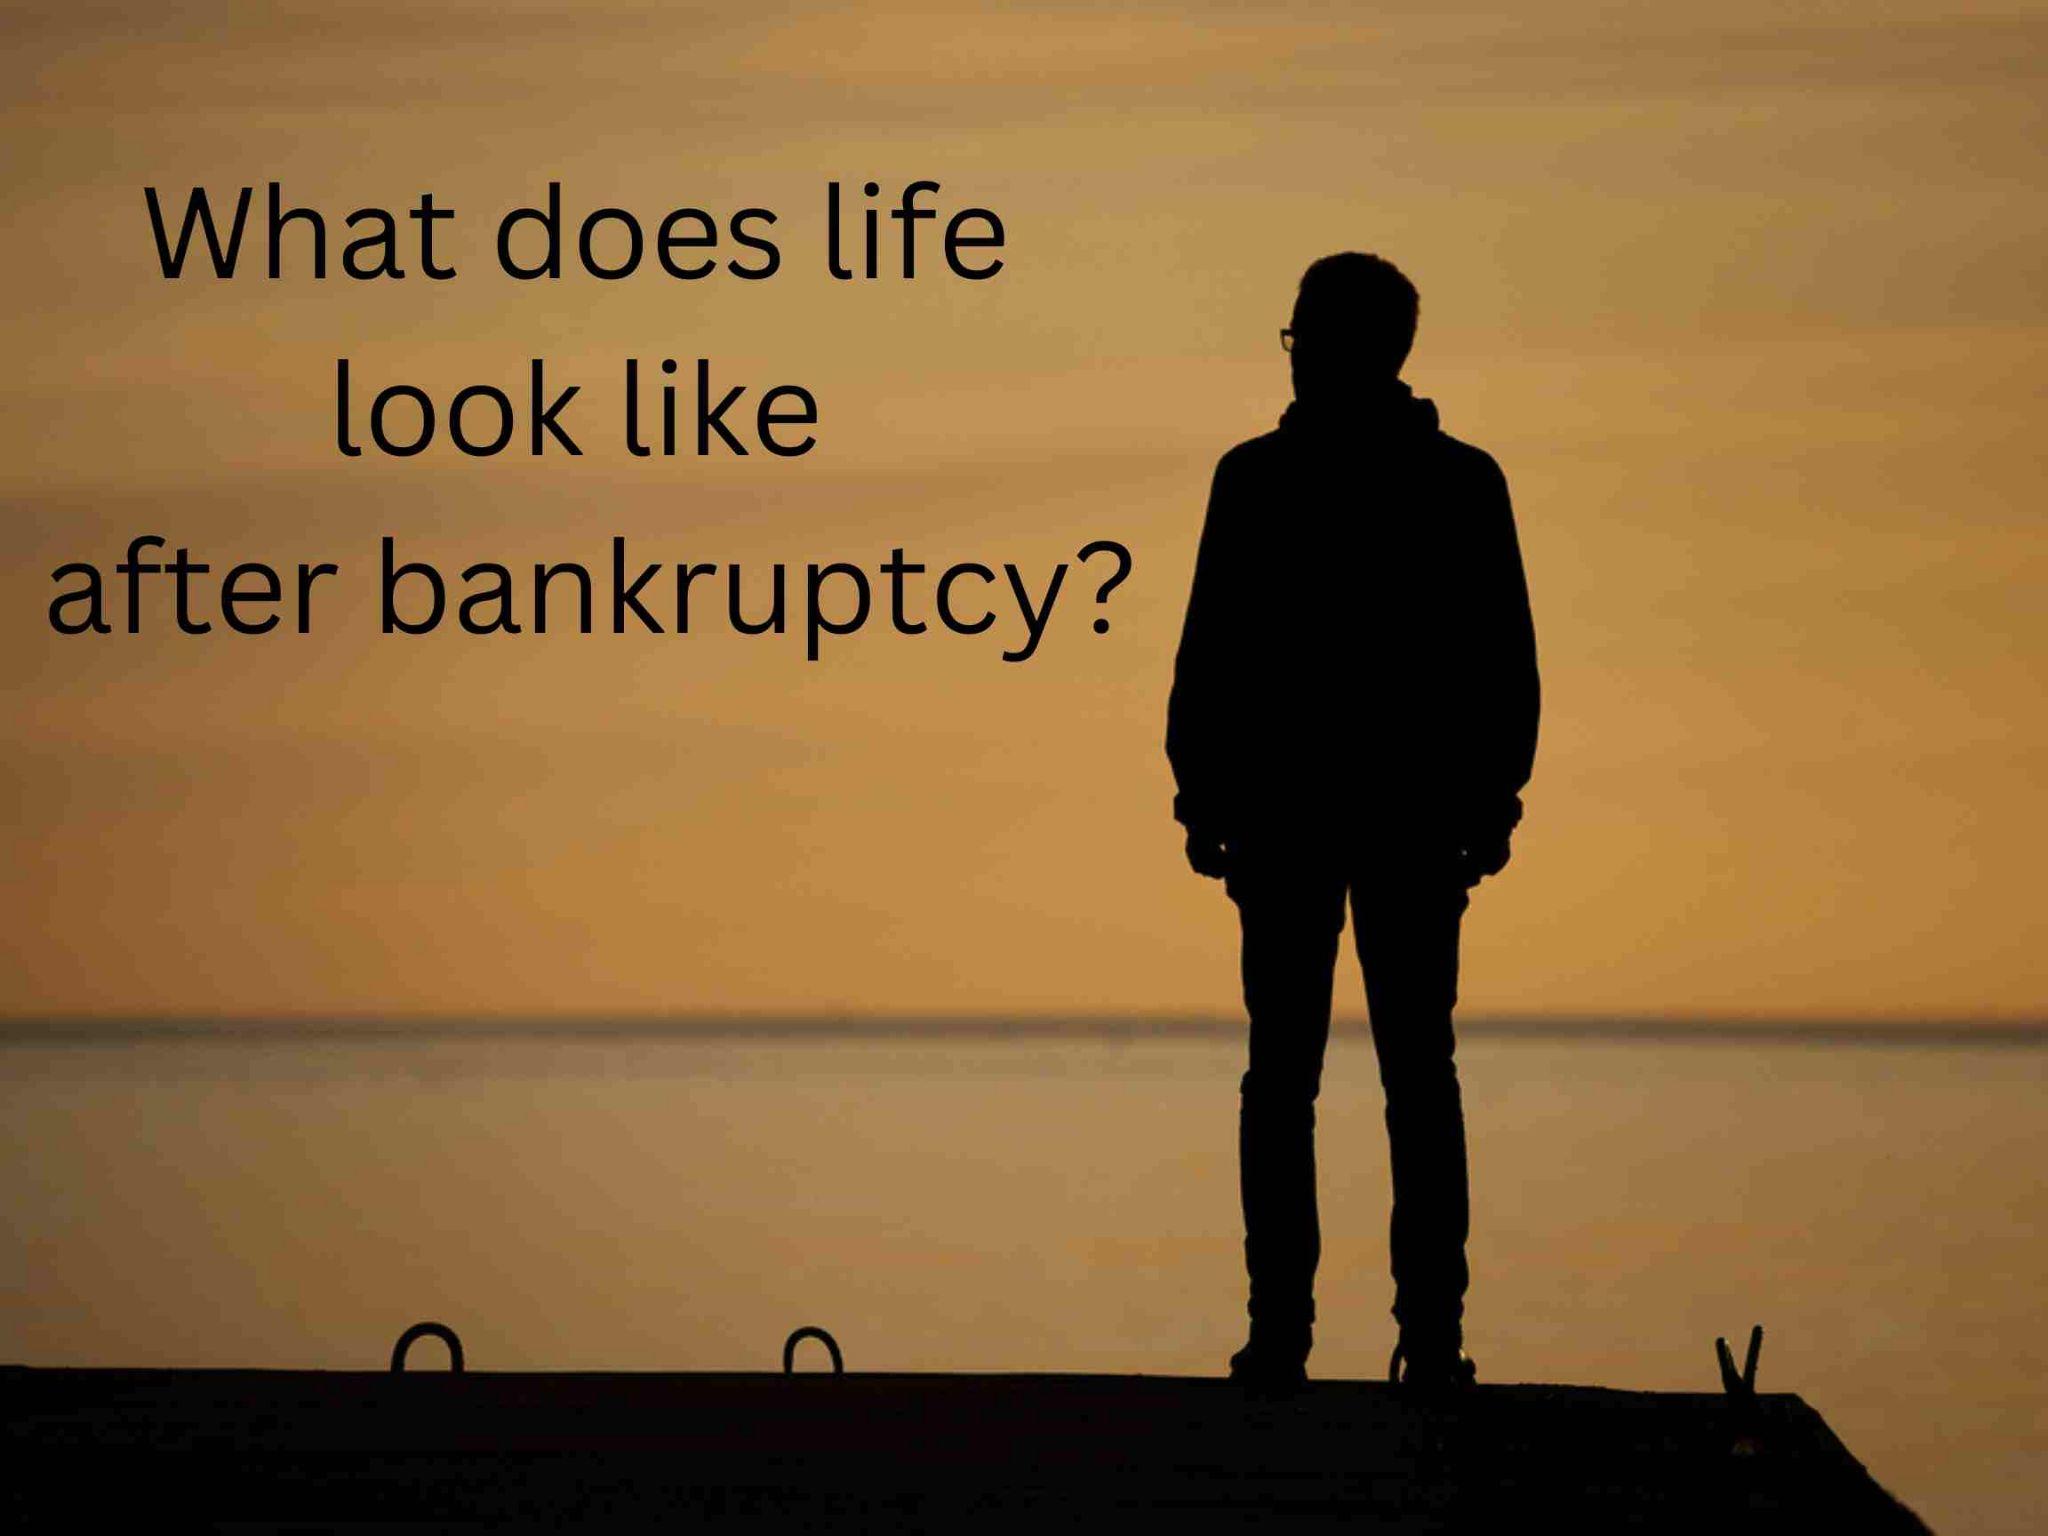 Silhouette of a person standing and looking at an orange sunset with the text "What does life look like after bankruptcy? Weigh Your Options.